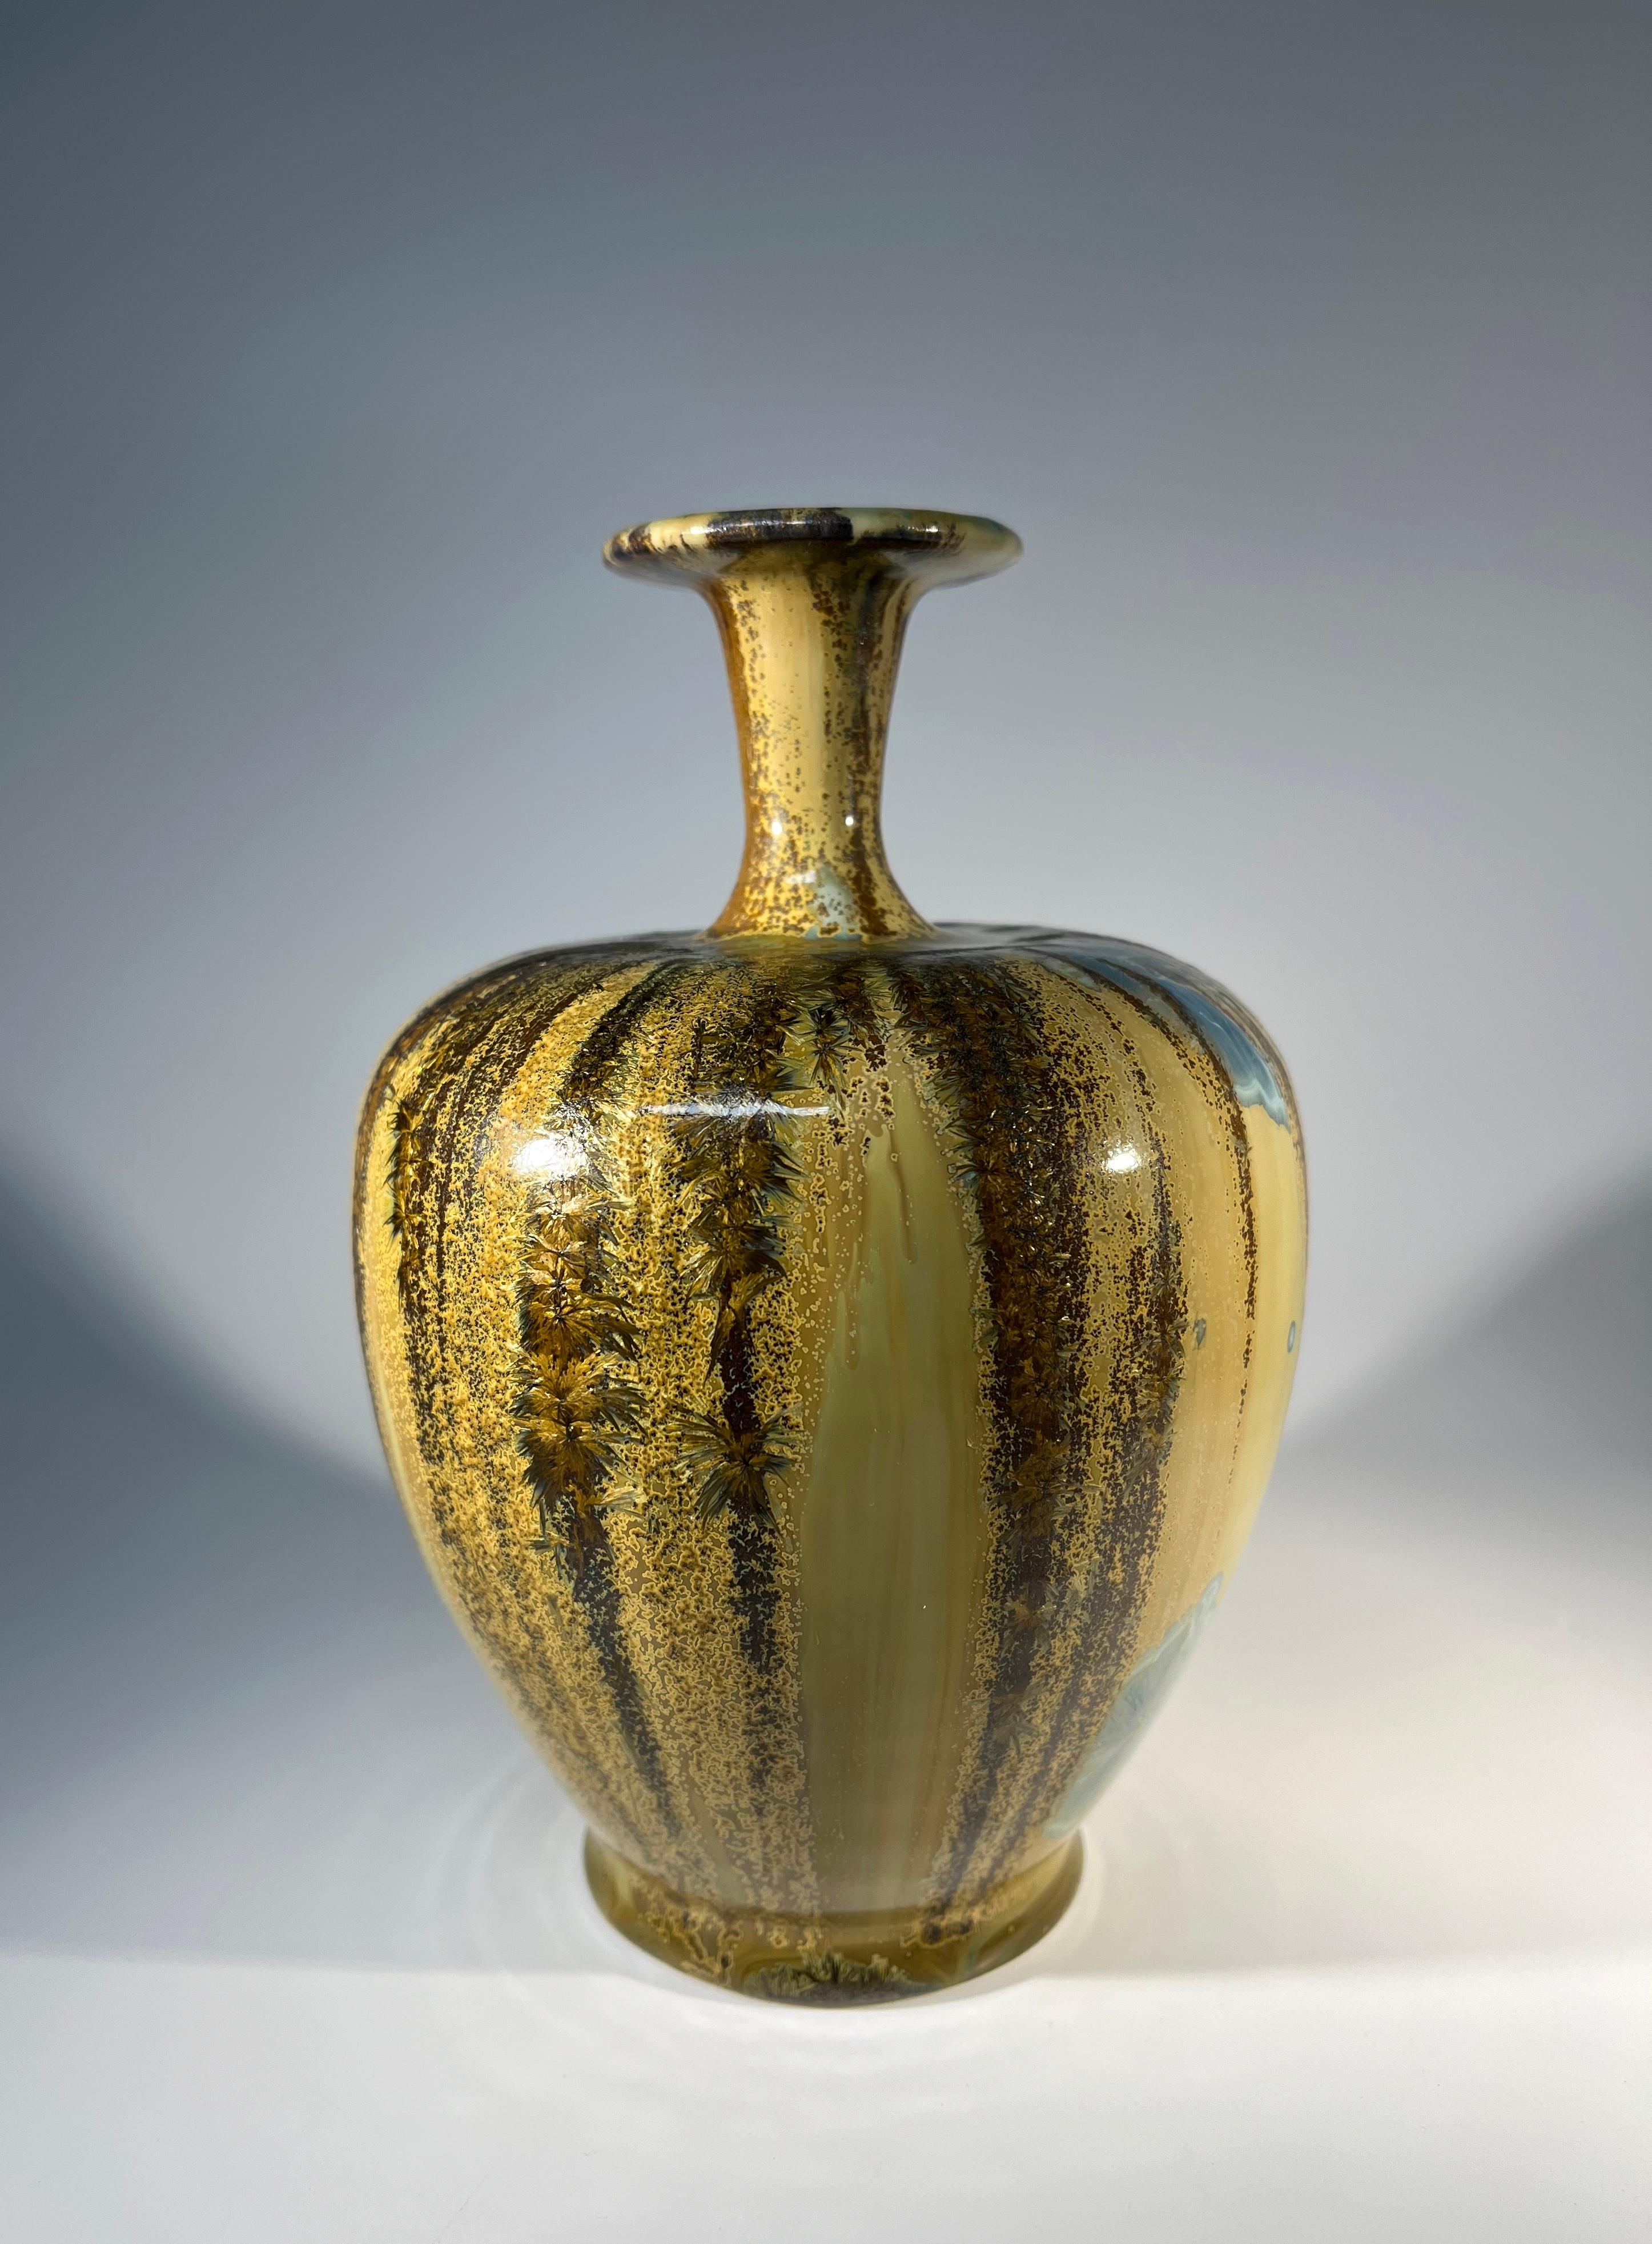 Impeccable Crystalline Glaze Studio Pottery Vase By Maurice Young Sussex England In Excellent Condition For Sale In Rothley, Leicestershire